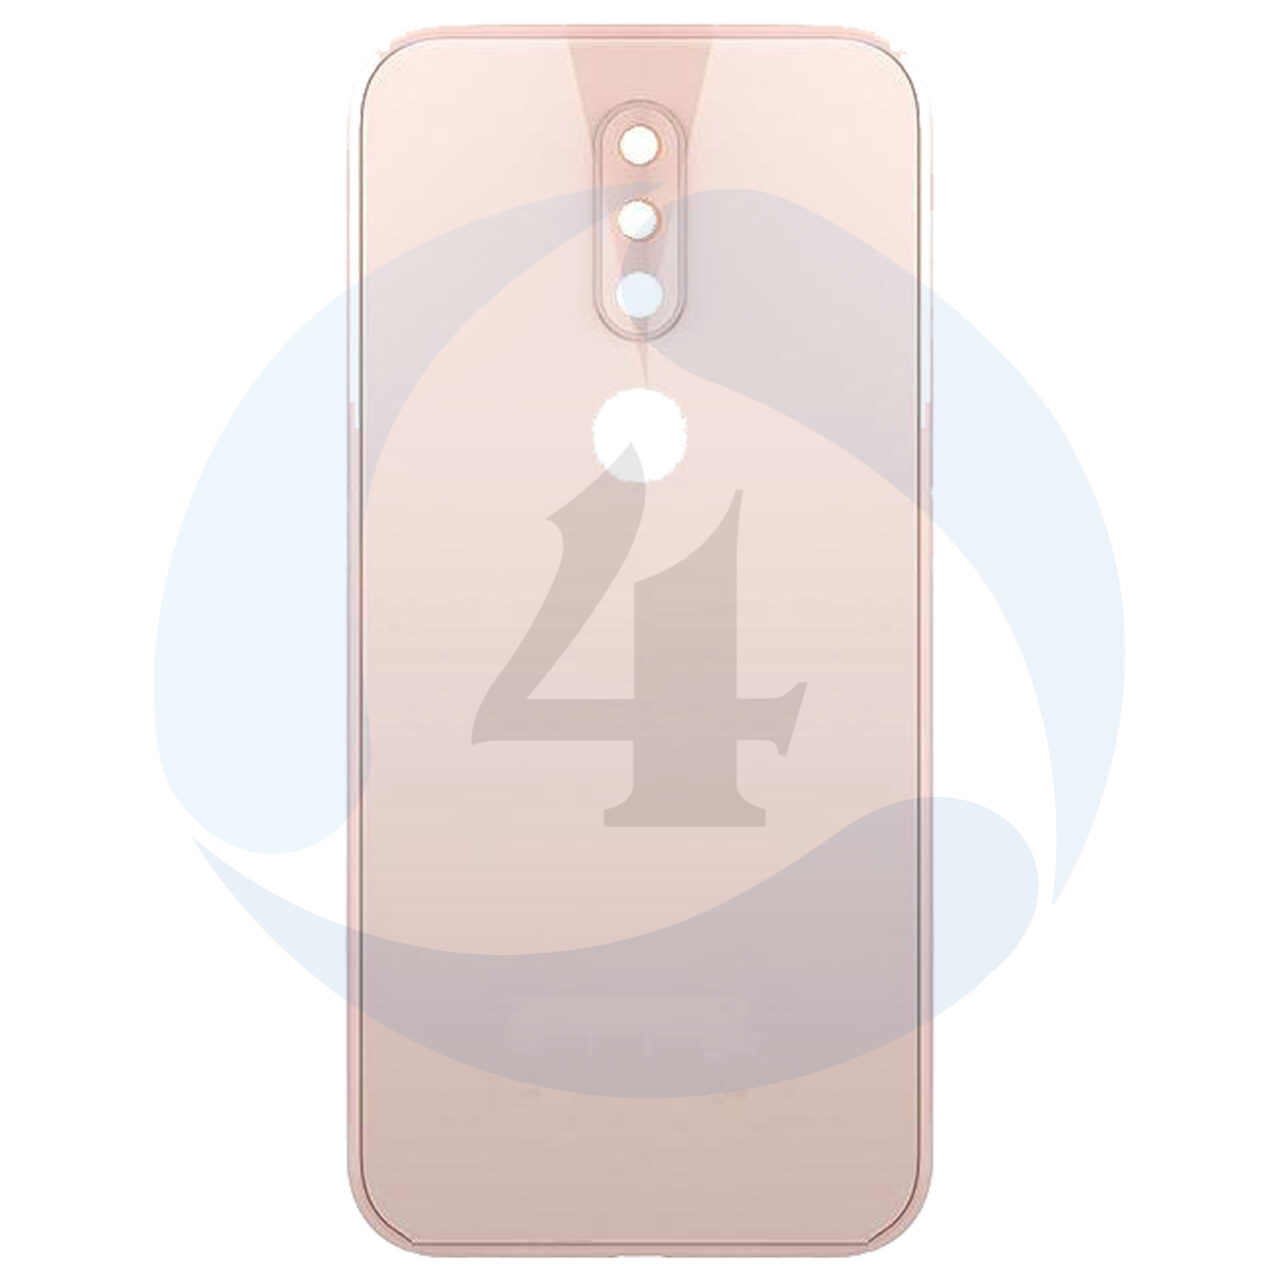 Back panel cover for nokia 4 2 pink backcover batterij cover